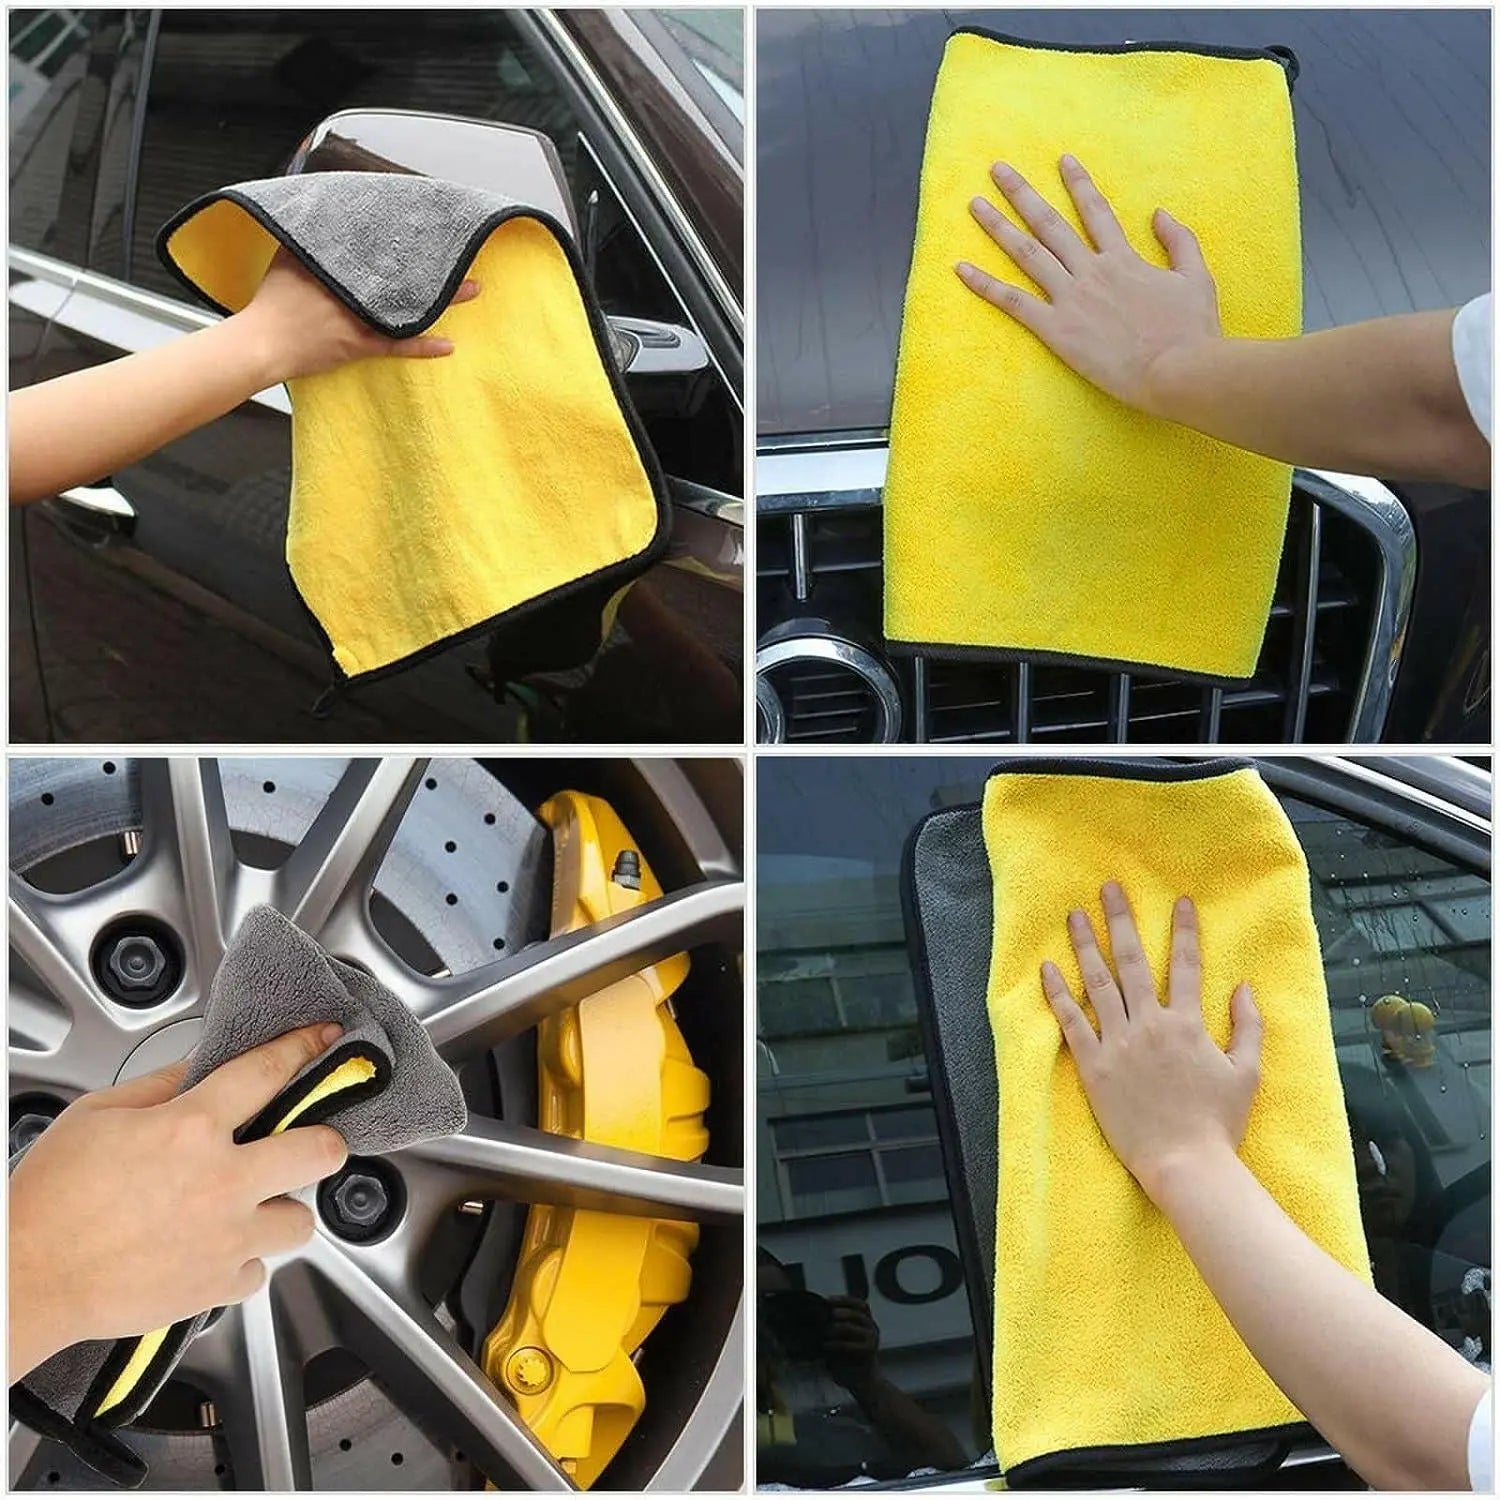 SKY-TOUCH 3pcs Microfiber Car Drying Towel for Car Cleaning and Detailing, Double Sided, Extra Thick Plush Microfiber Towel Lint Super Absorbent